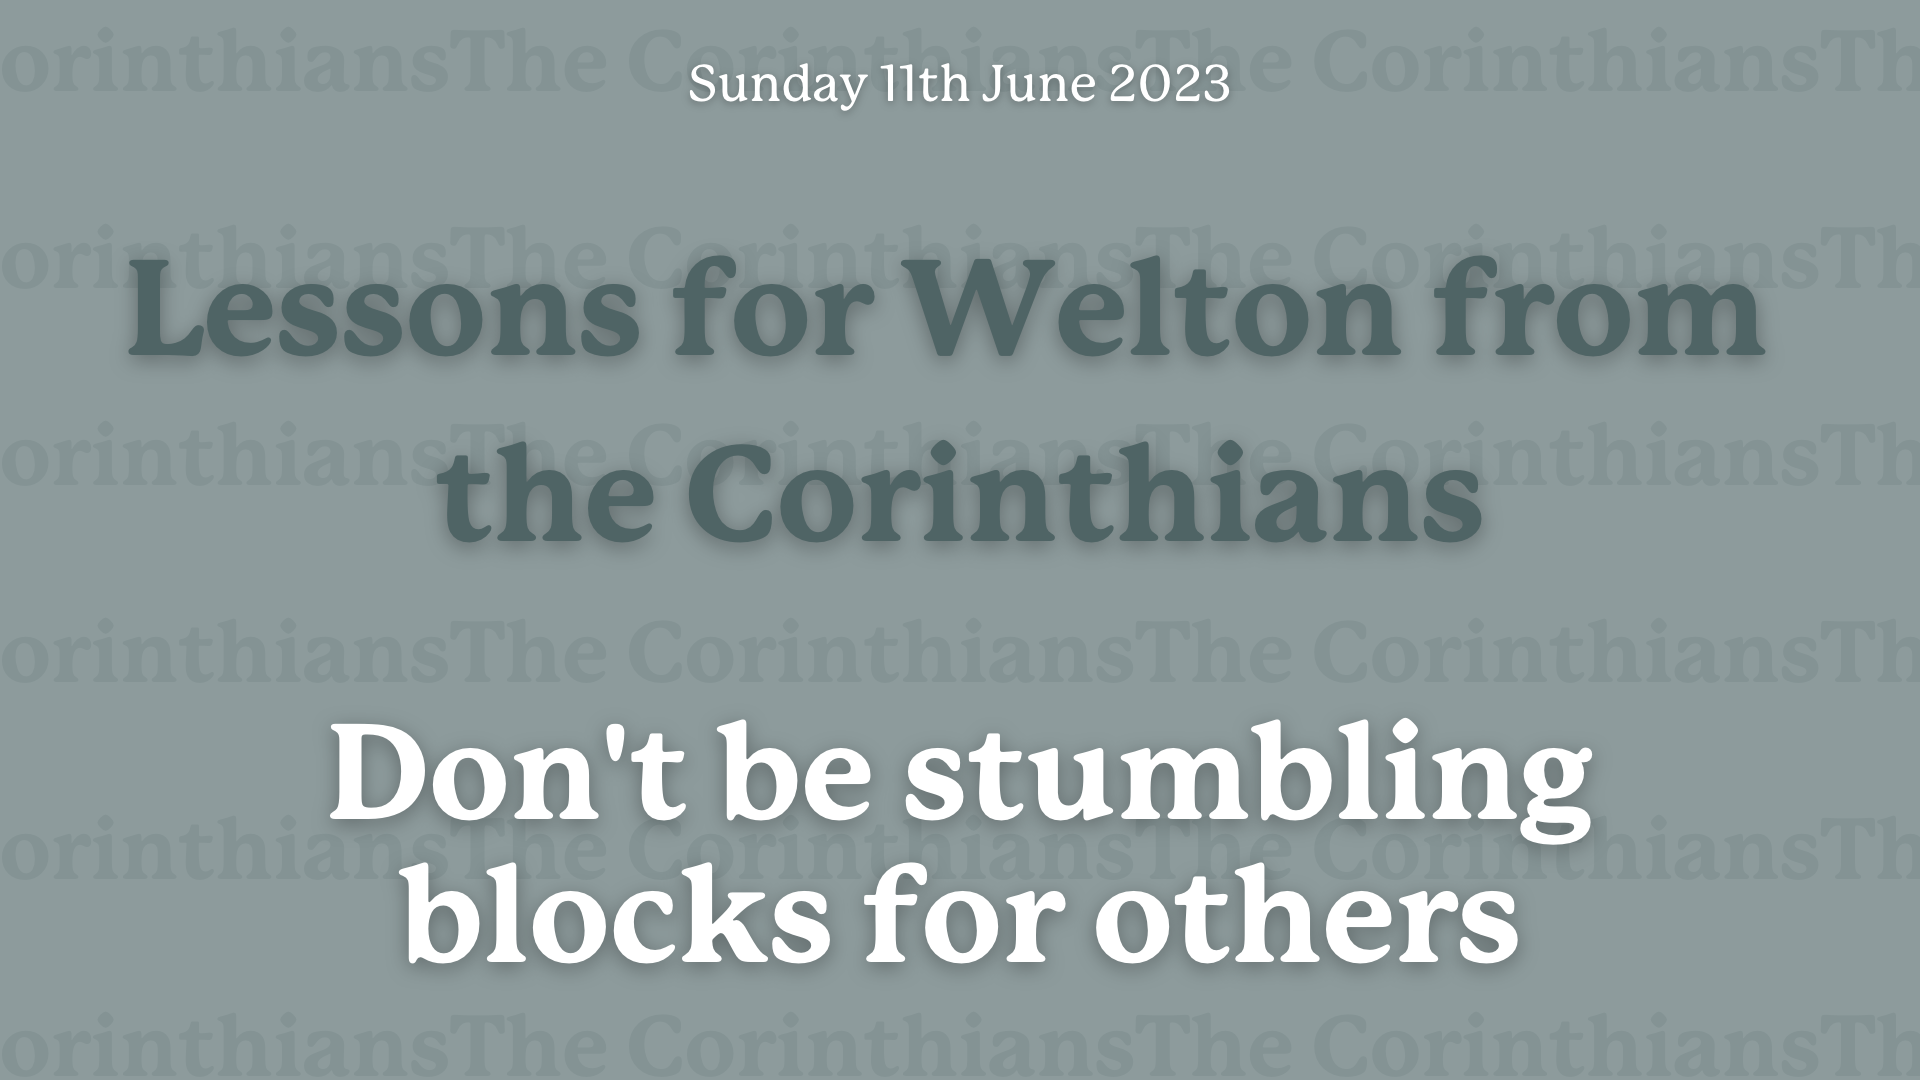 Sunday Service - Don't be a stumbling block to others